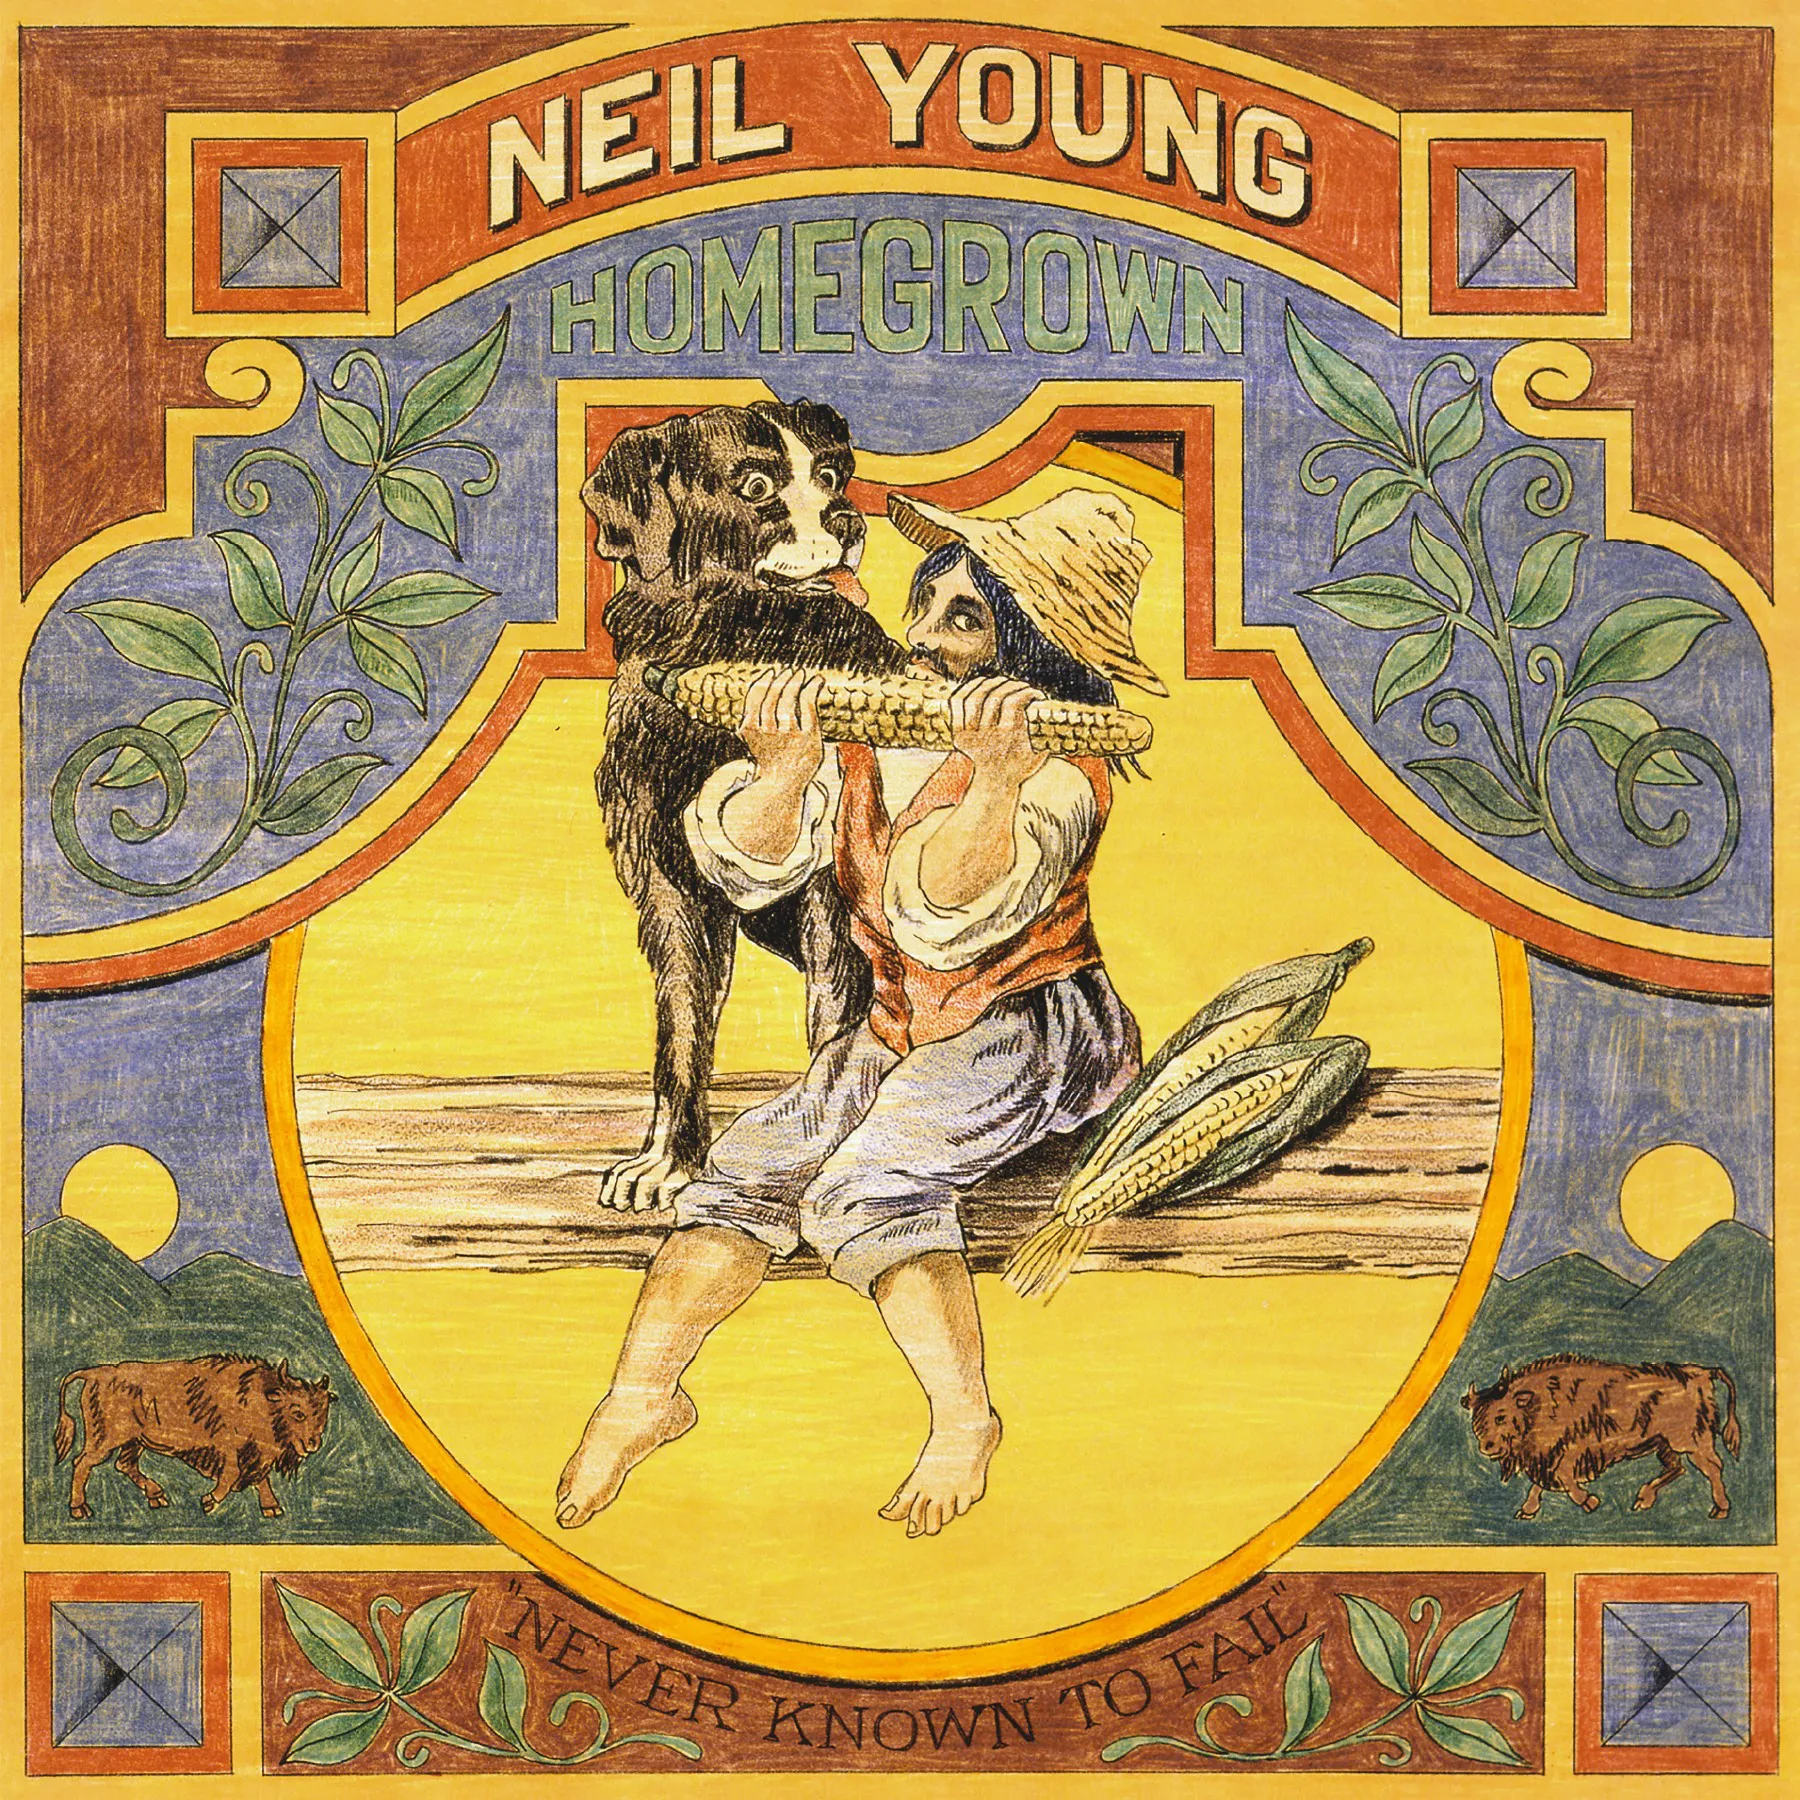 Neil Young Belatedly Shares His Home Grown Stash